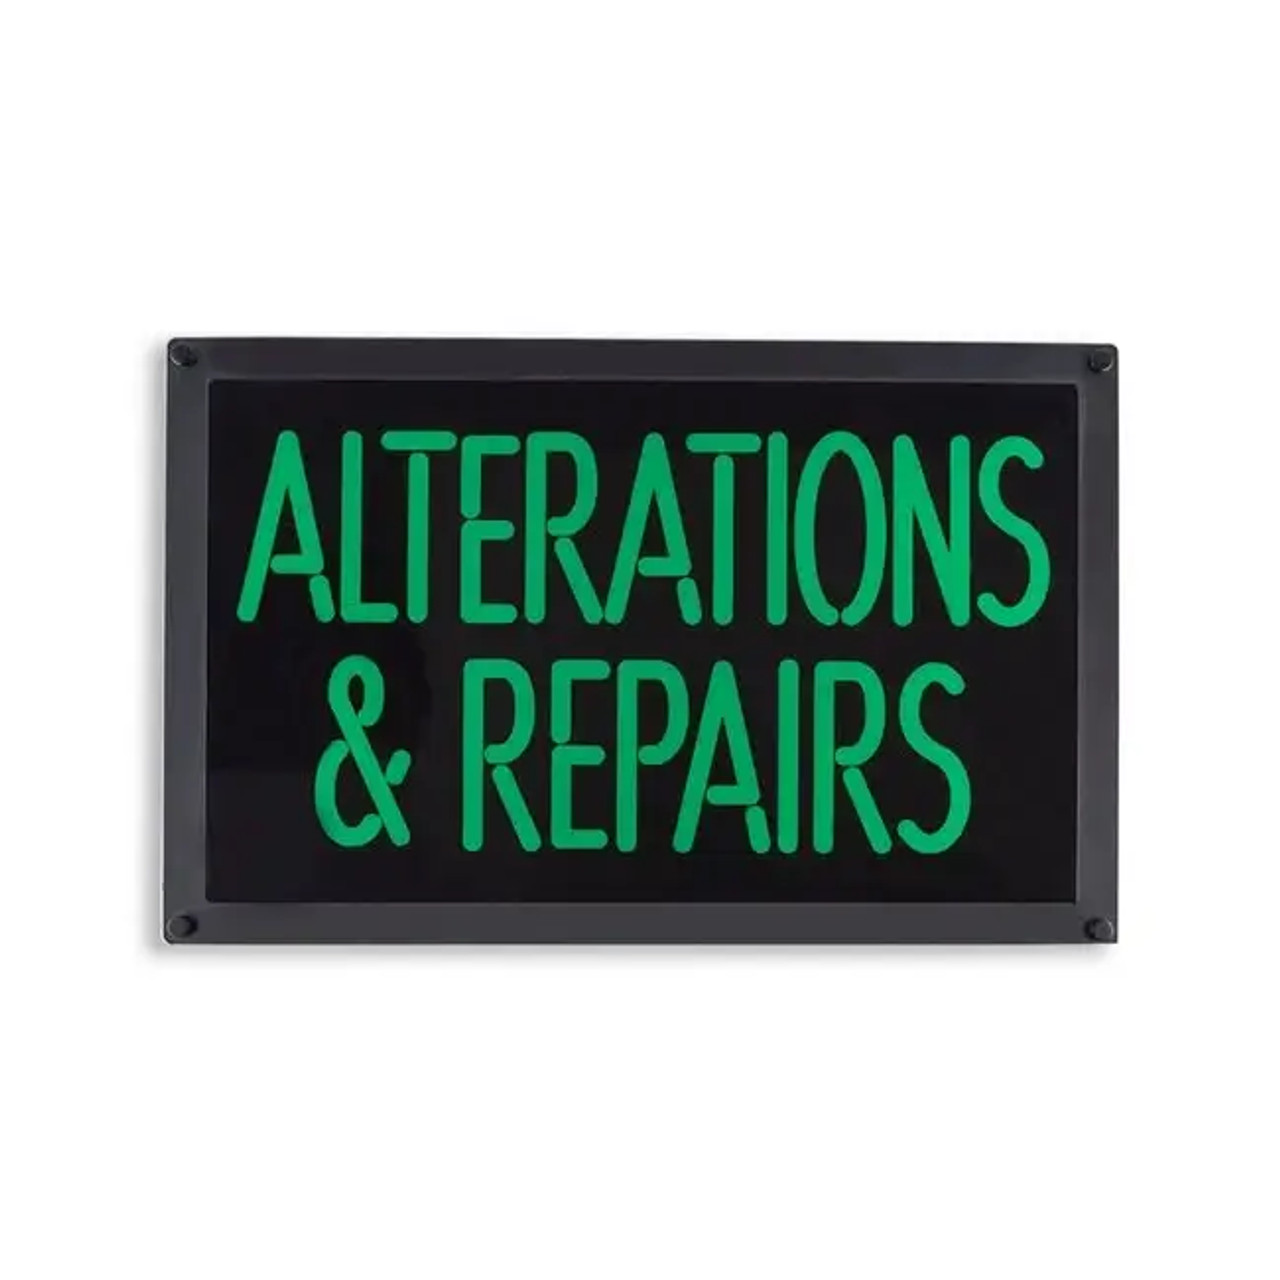 Cleaner's Supply "ALTERATIONS & REPAIRS" SLIM LED SIGN - 22" X 14" X 1/2" - Chicken Pieces